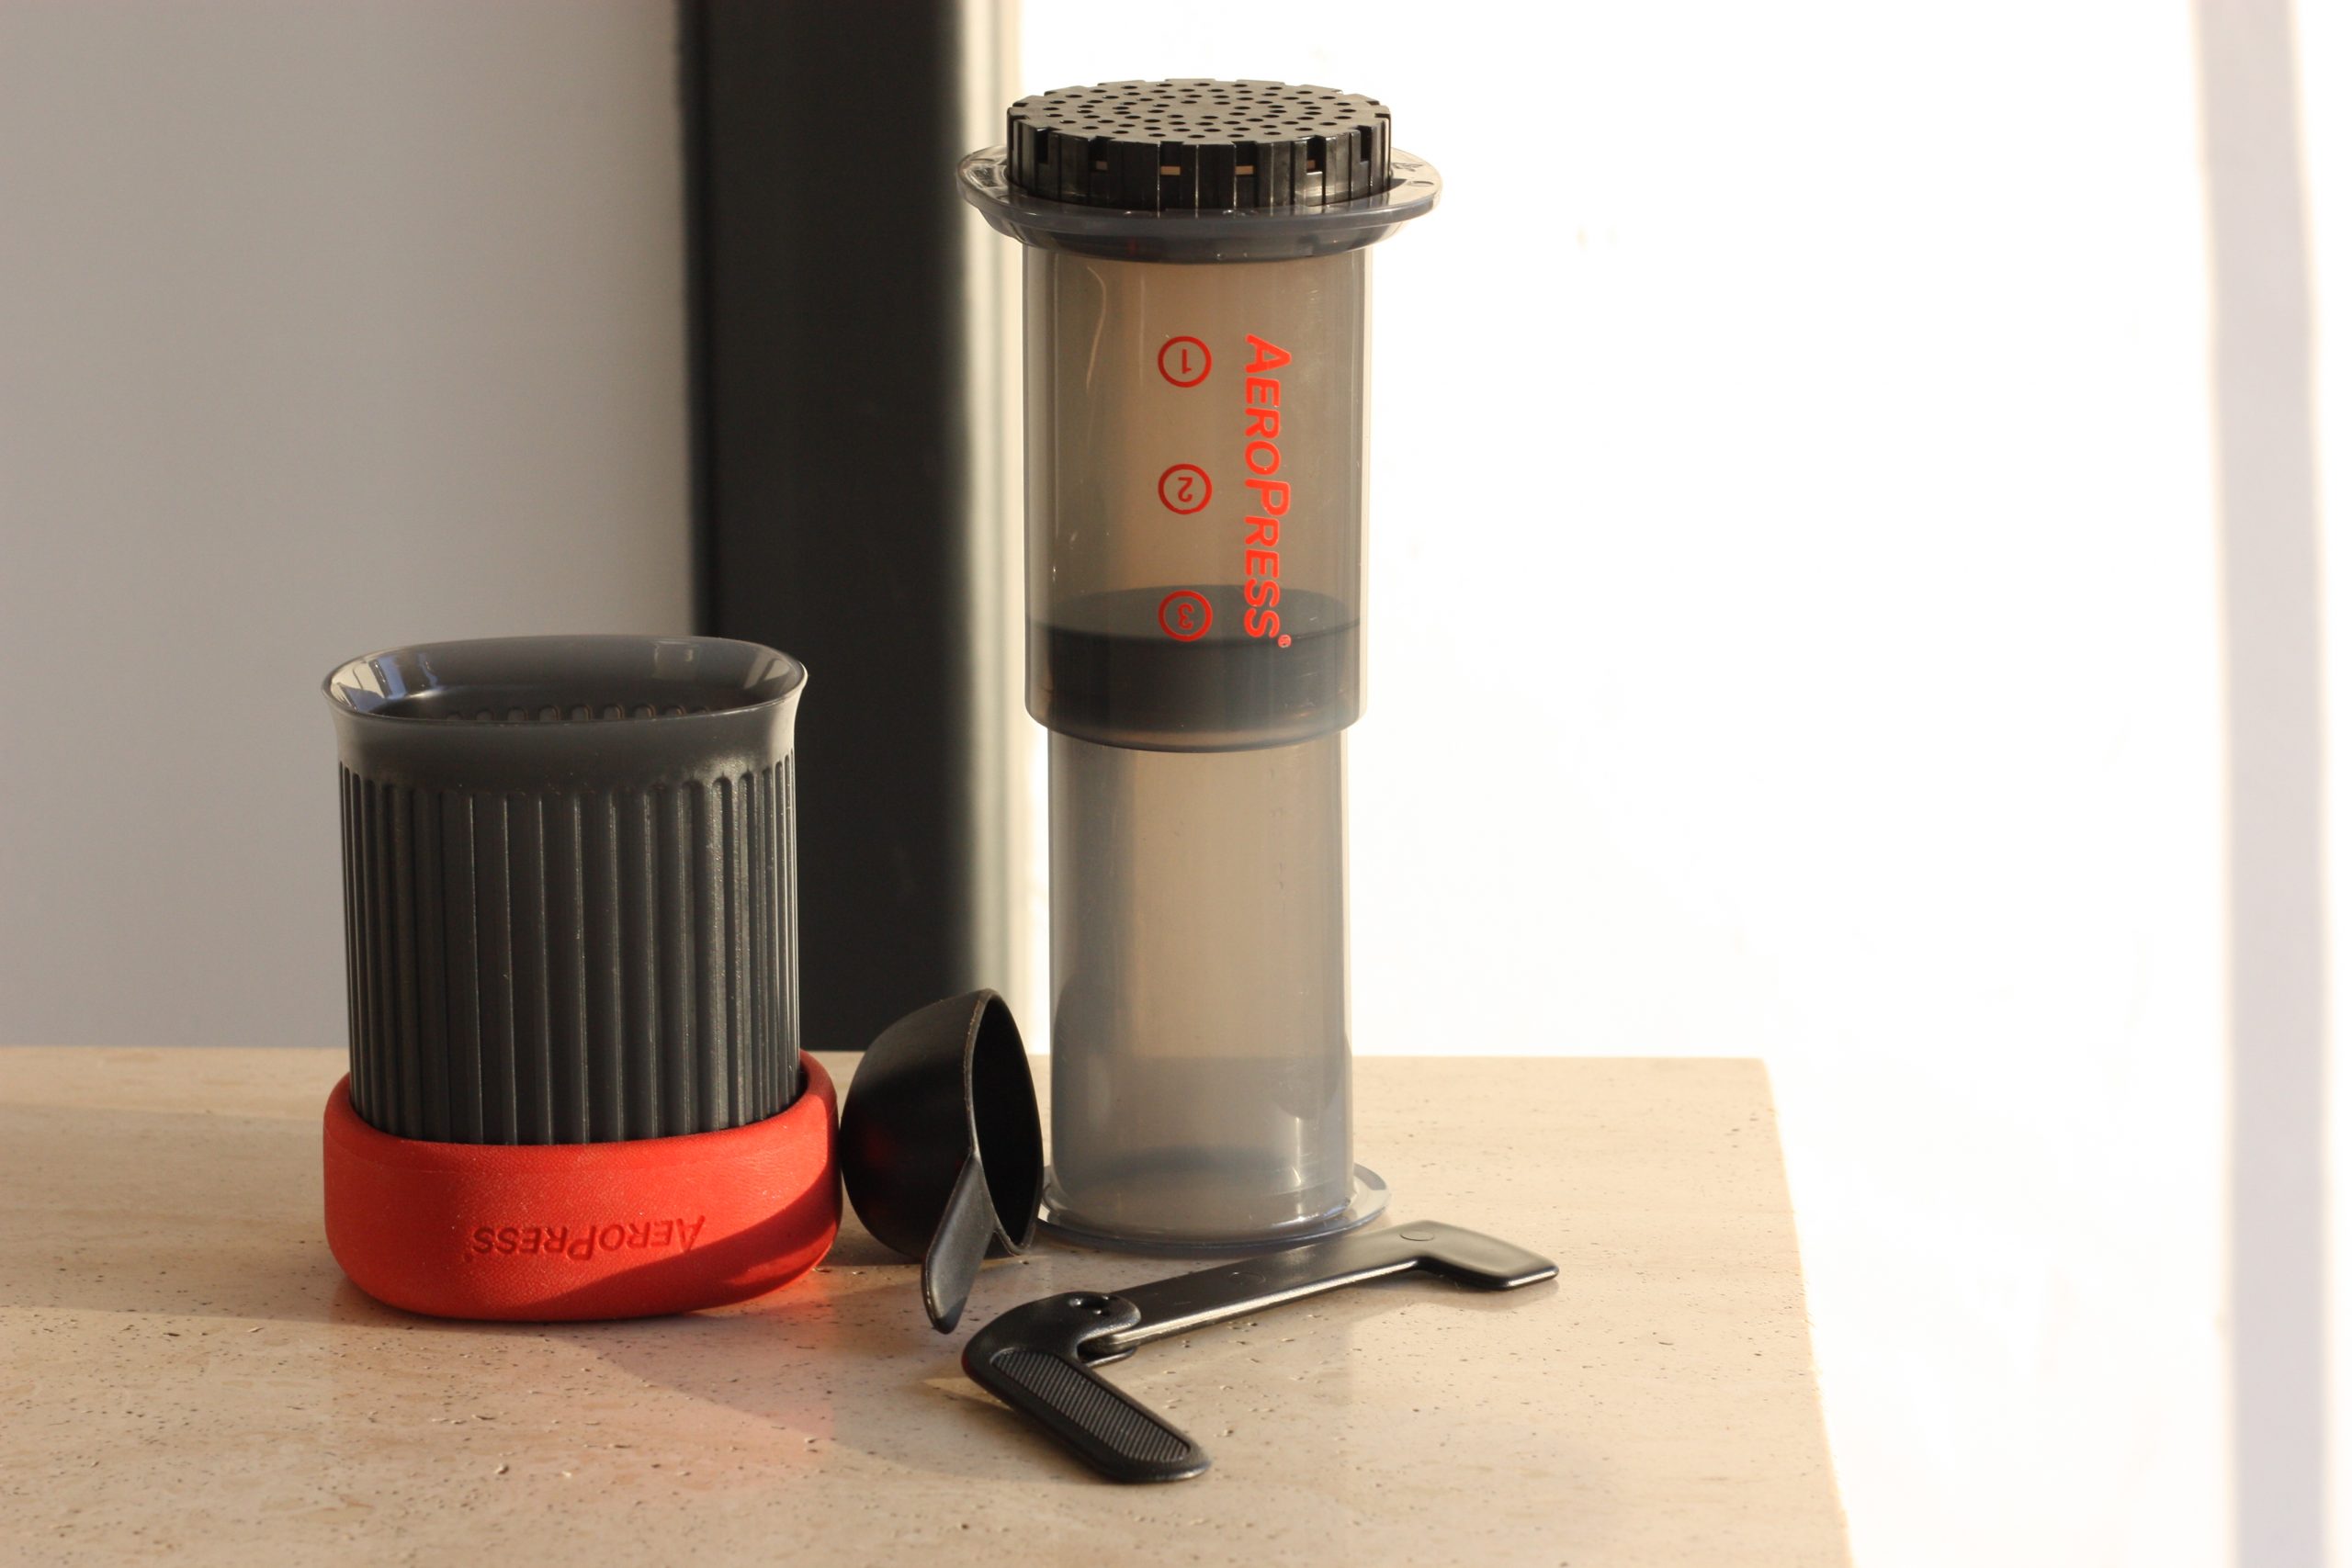 A Taste of Home: A Love Letter to the Aeropress Go